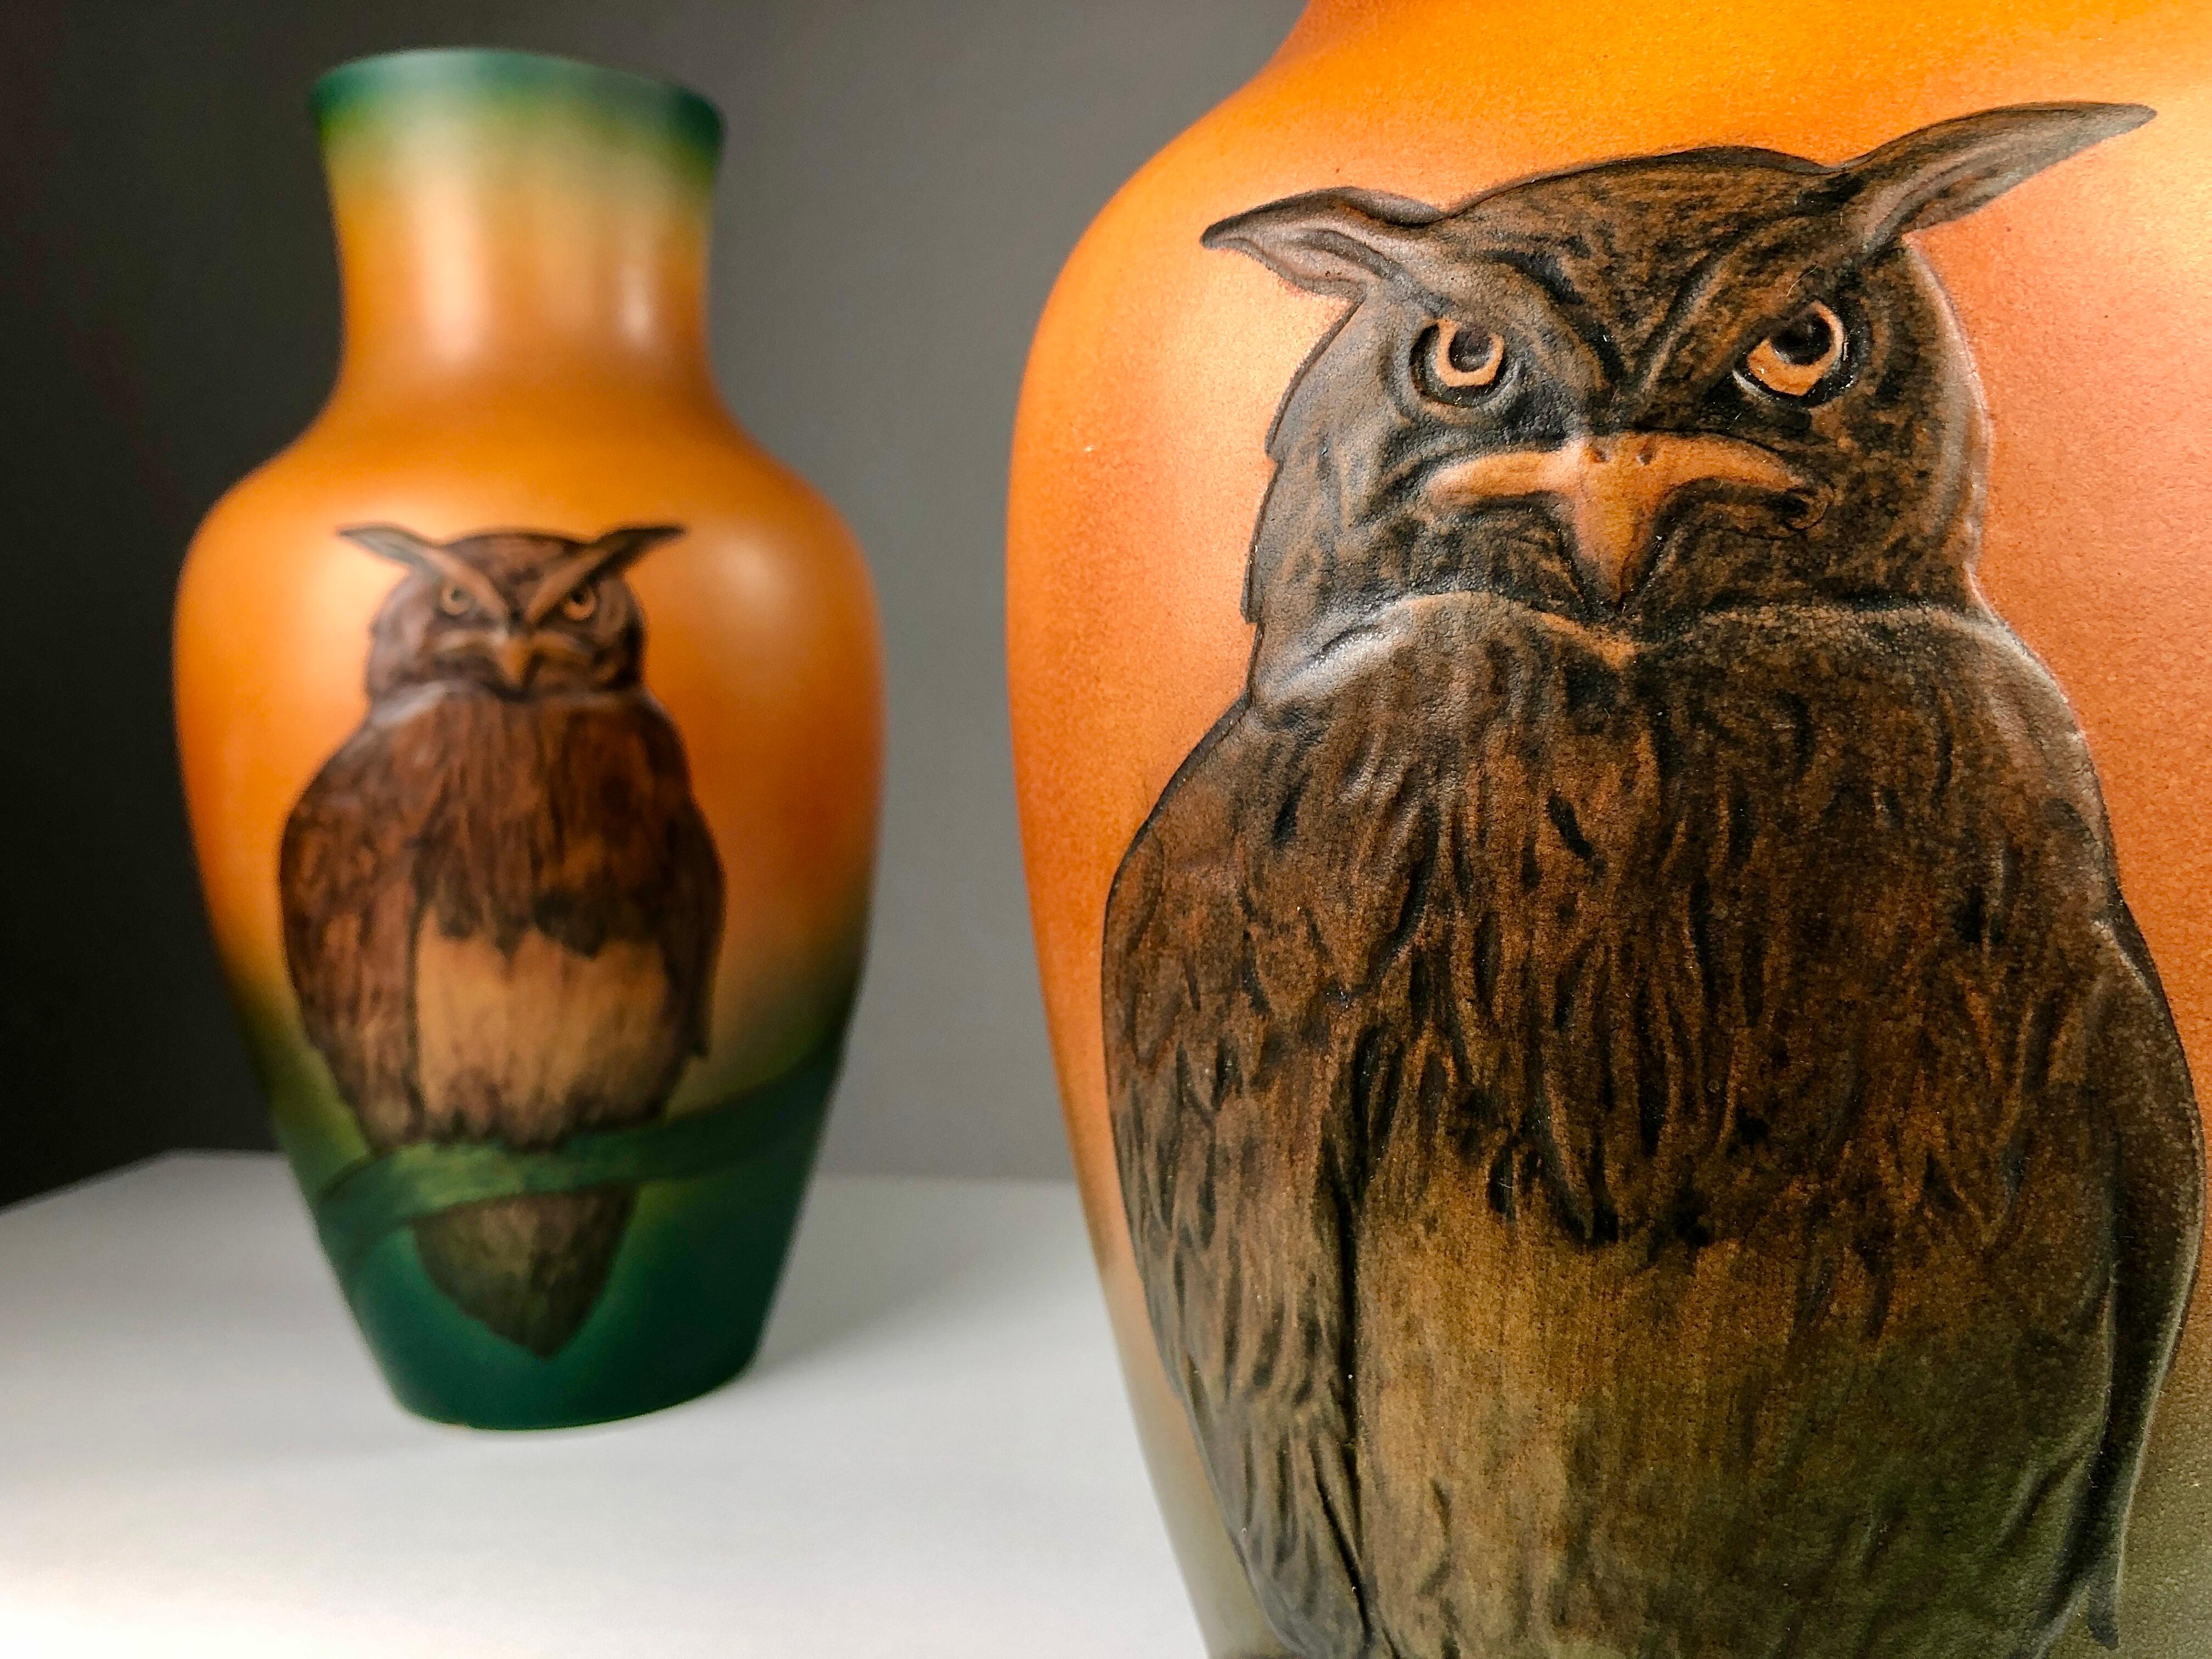 Danish Art Nouveau Owl vases by J. Resen Stenstrup for P.Ibsens Enke in 1909.

The set of two art nouveau vases that feature a very well made lively owl at the frontside of the vase and a bat on the backside of the vase are in very good